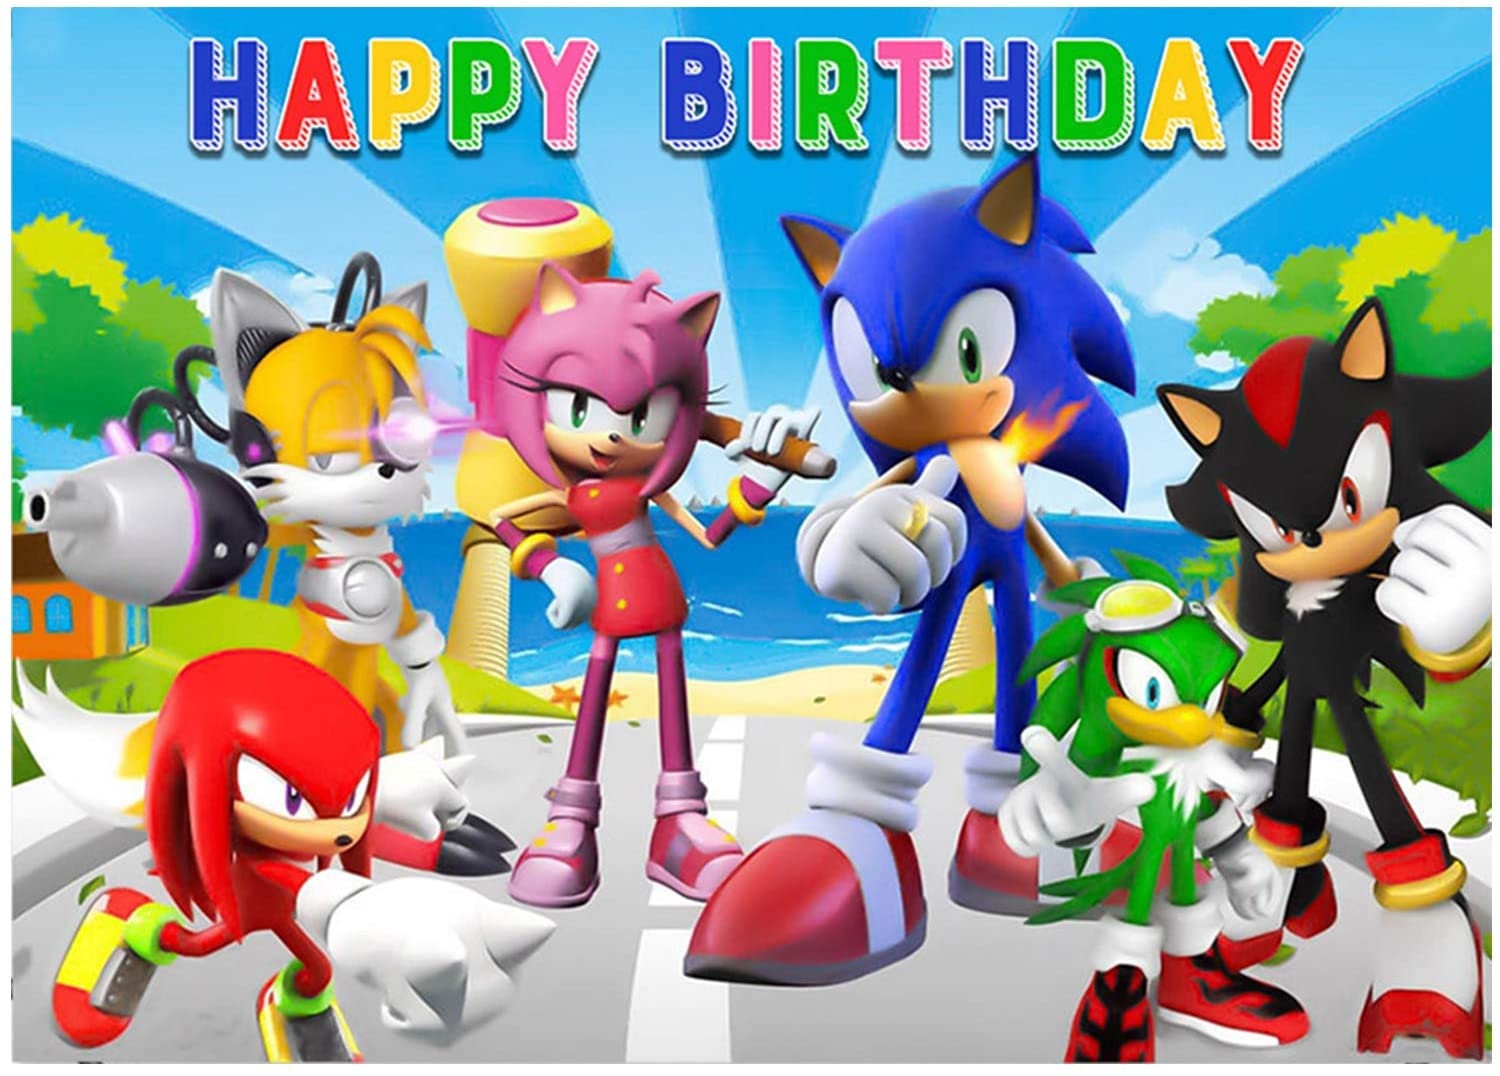 Sonic Party Supplies Birthday Decorations, Sonic Party Favors - Banner,  Cake Topper, Plates, Table Knife, Fork, Spoon and Foil Balloon for Kids  Themed